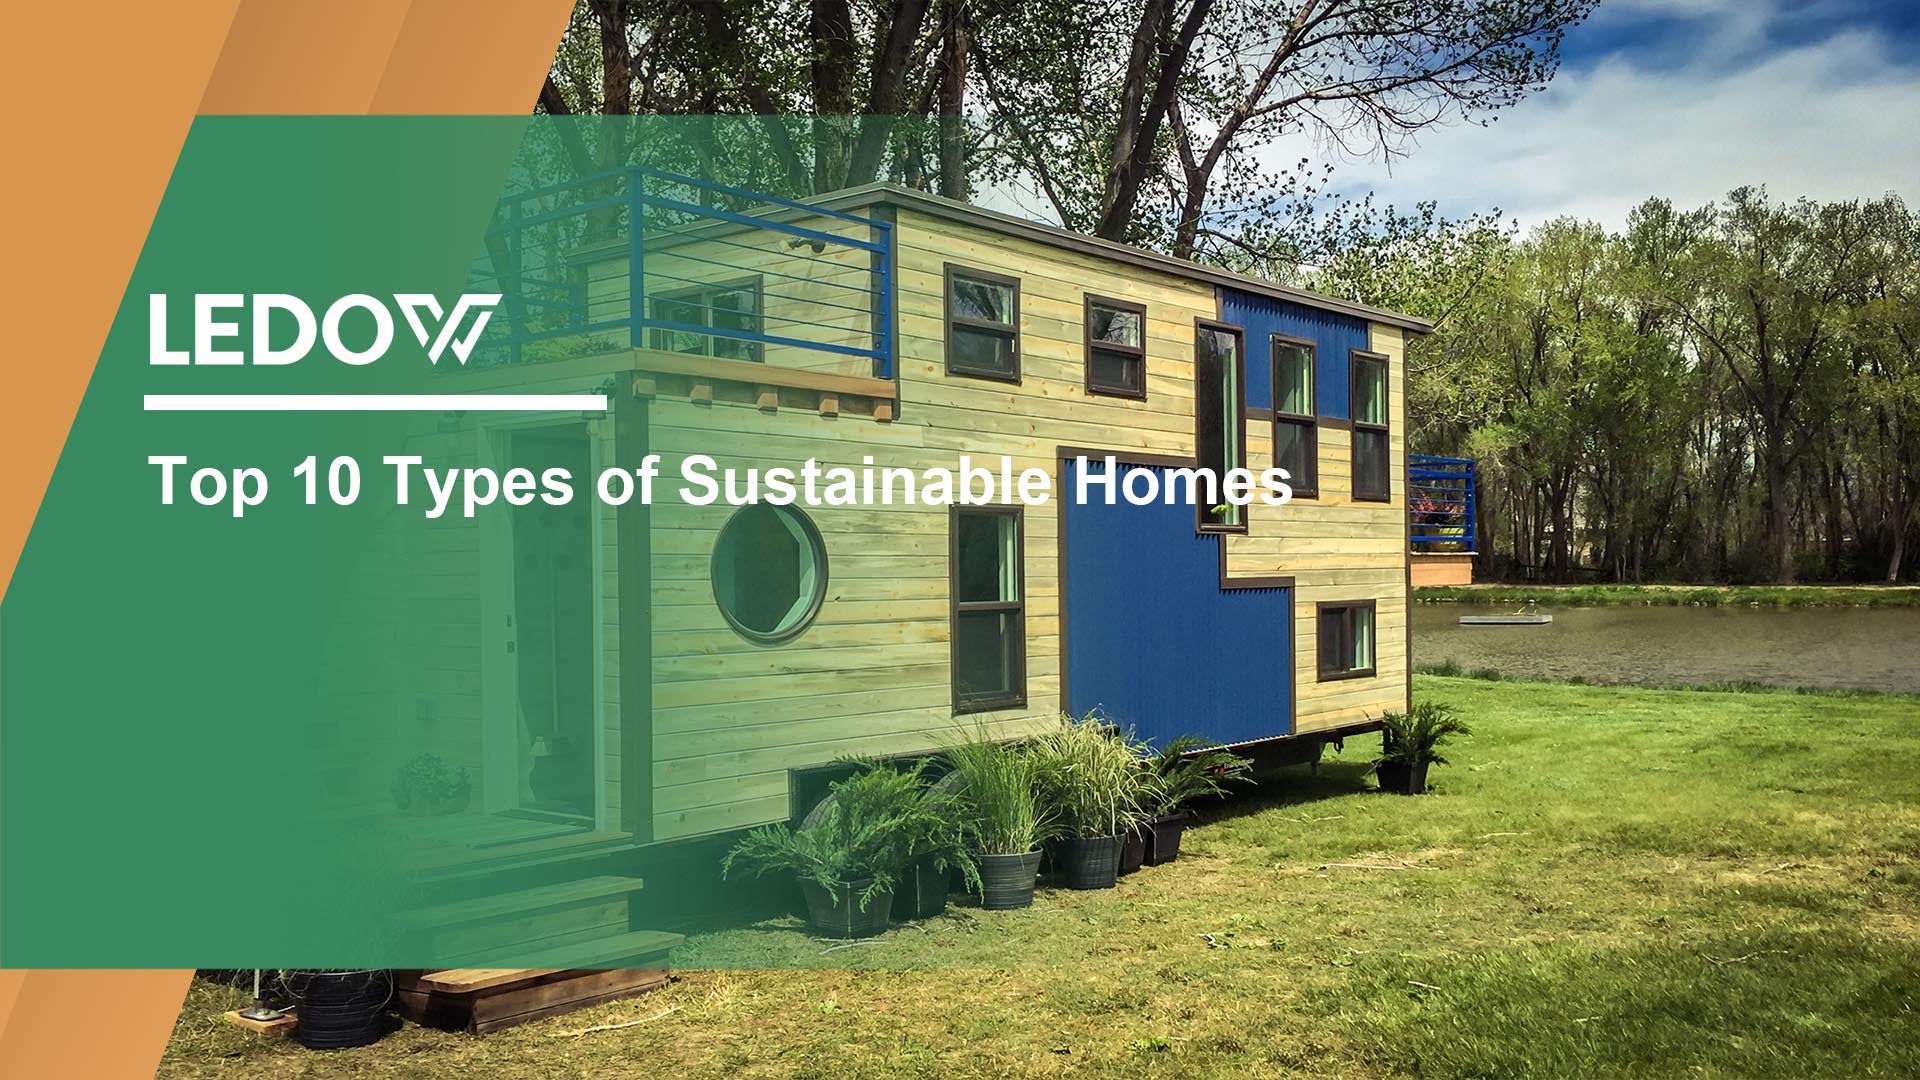 Top 10 Types of Sustainable Homes